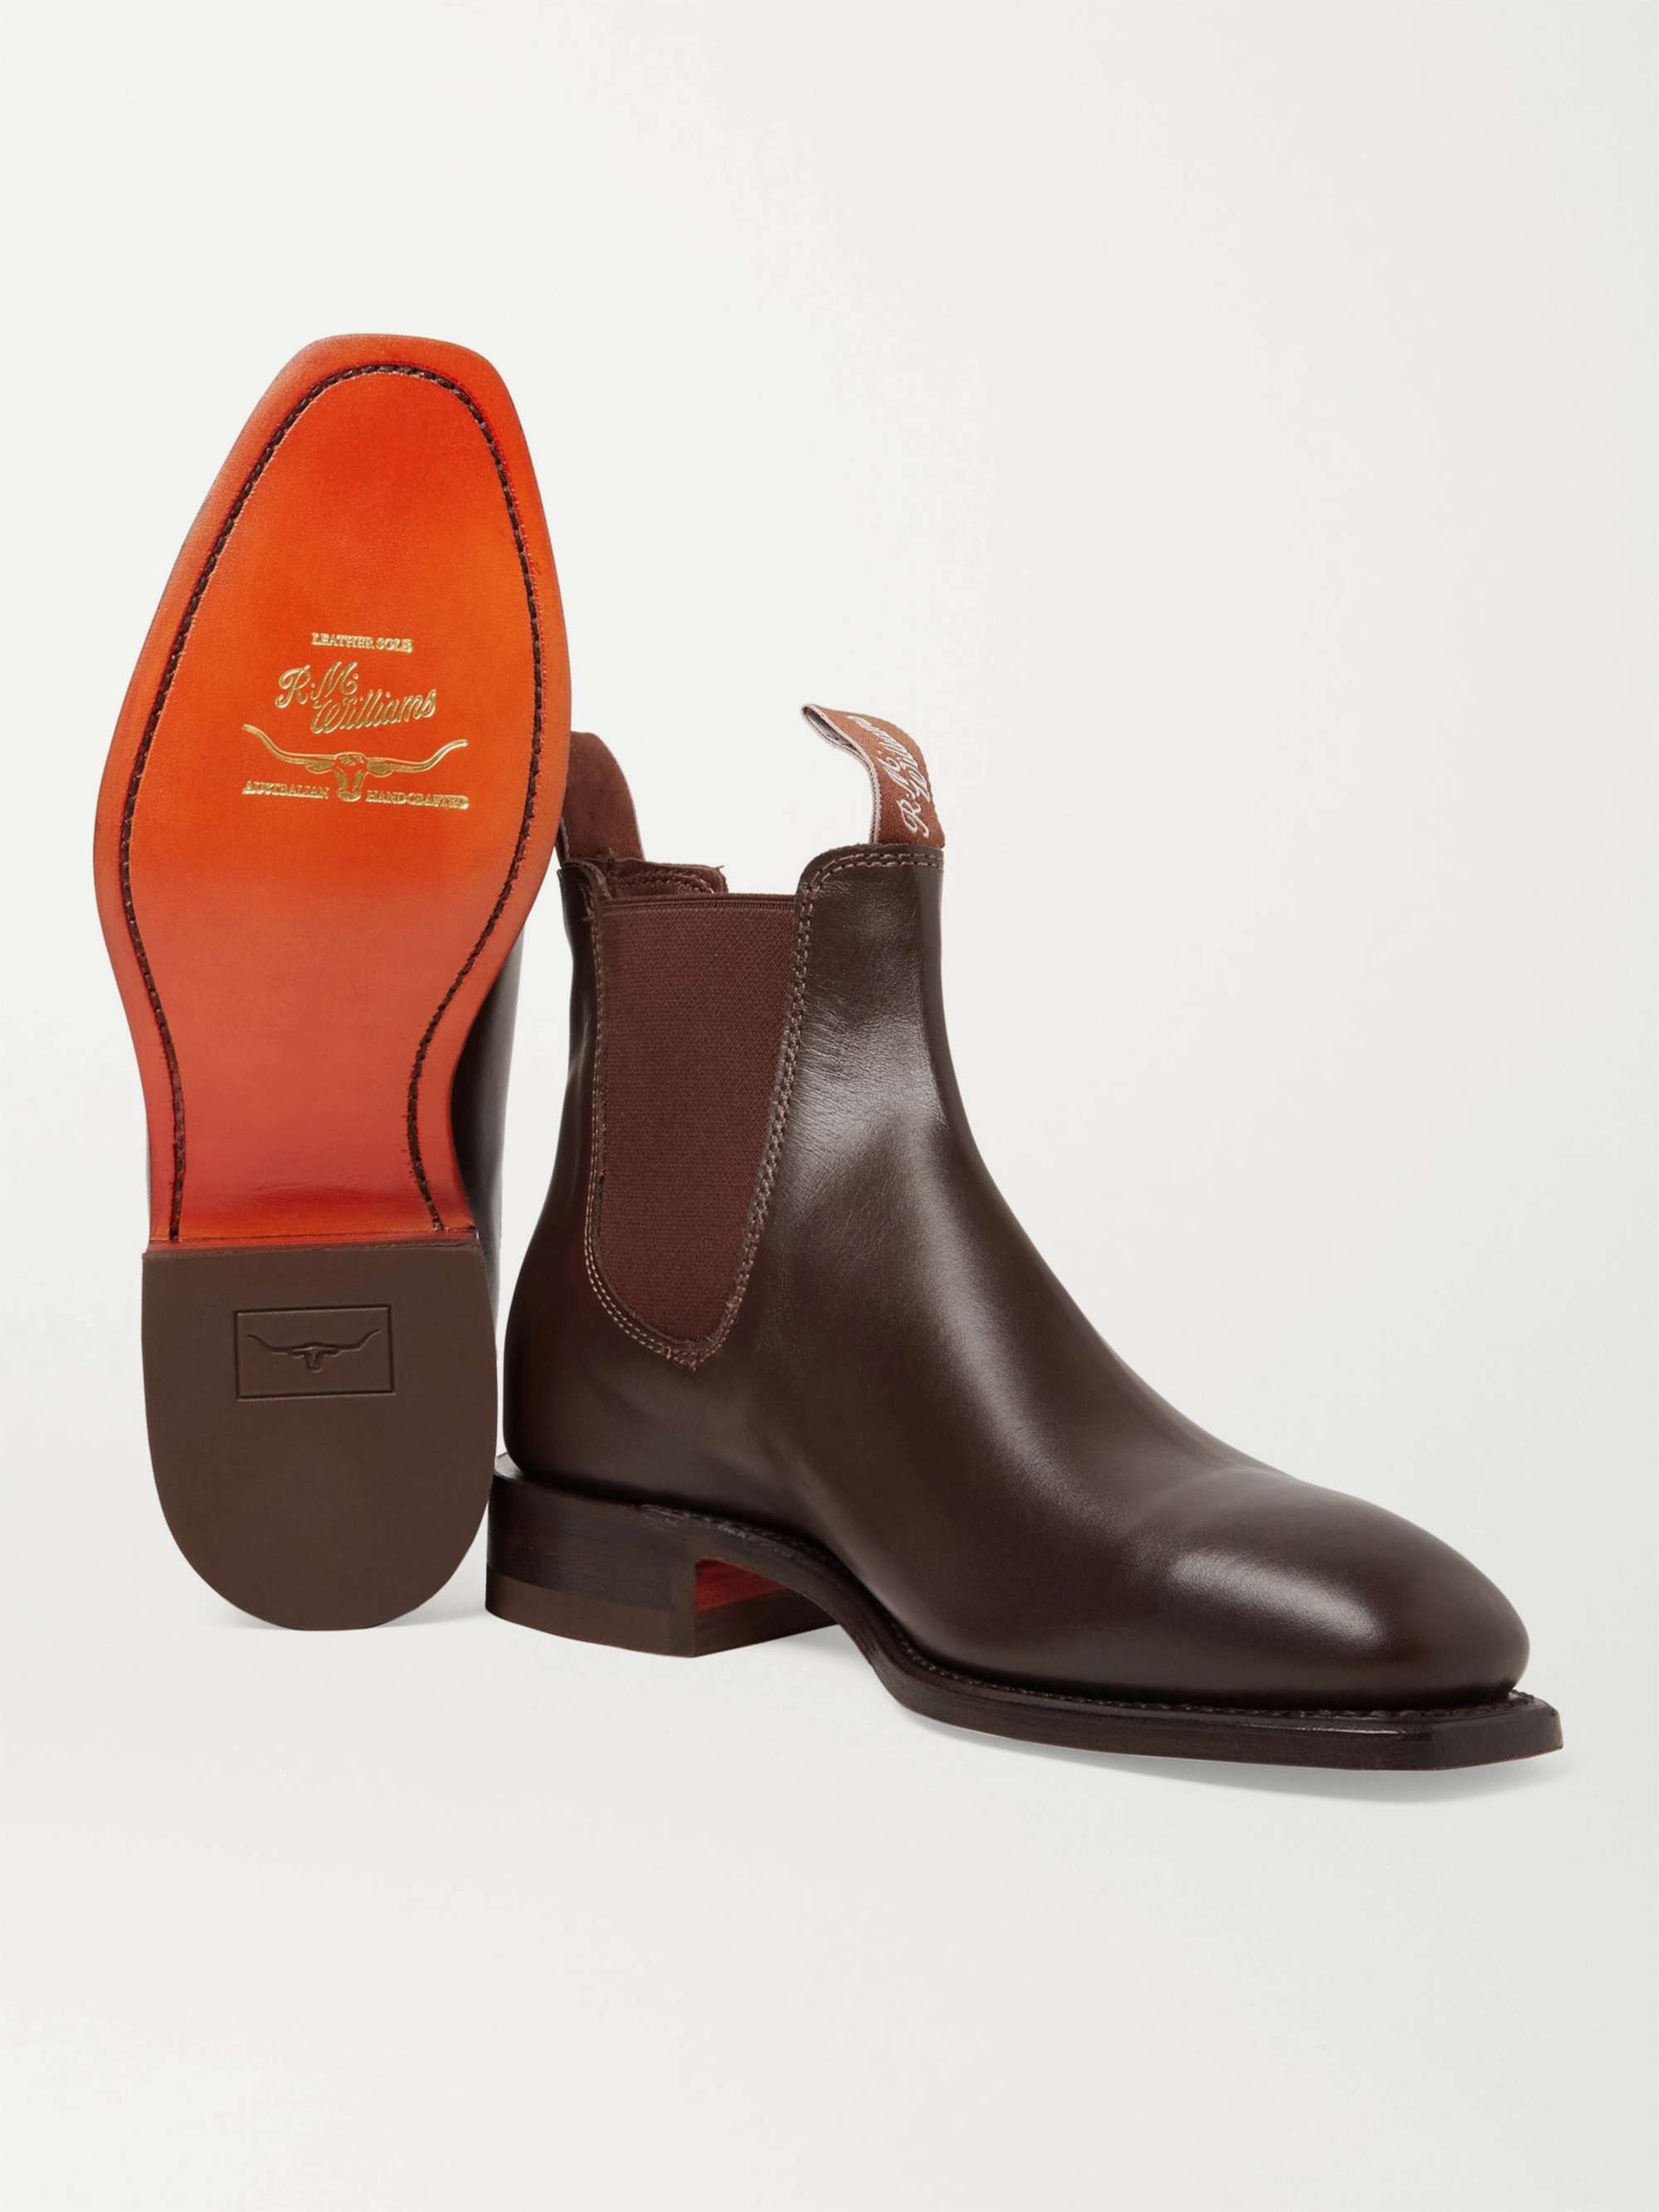 RM Williams Classic Boots for Men